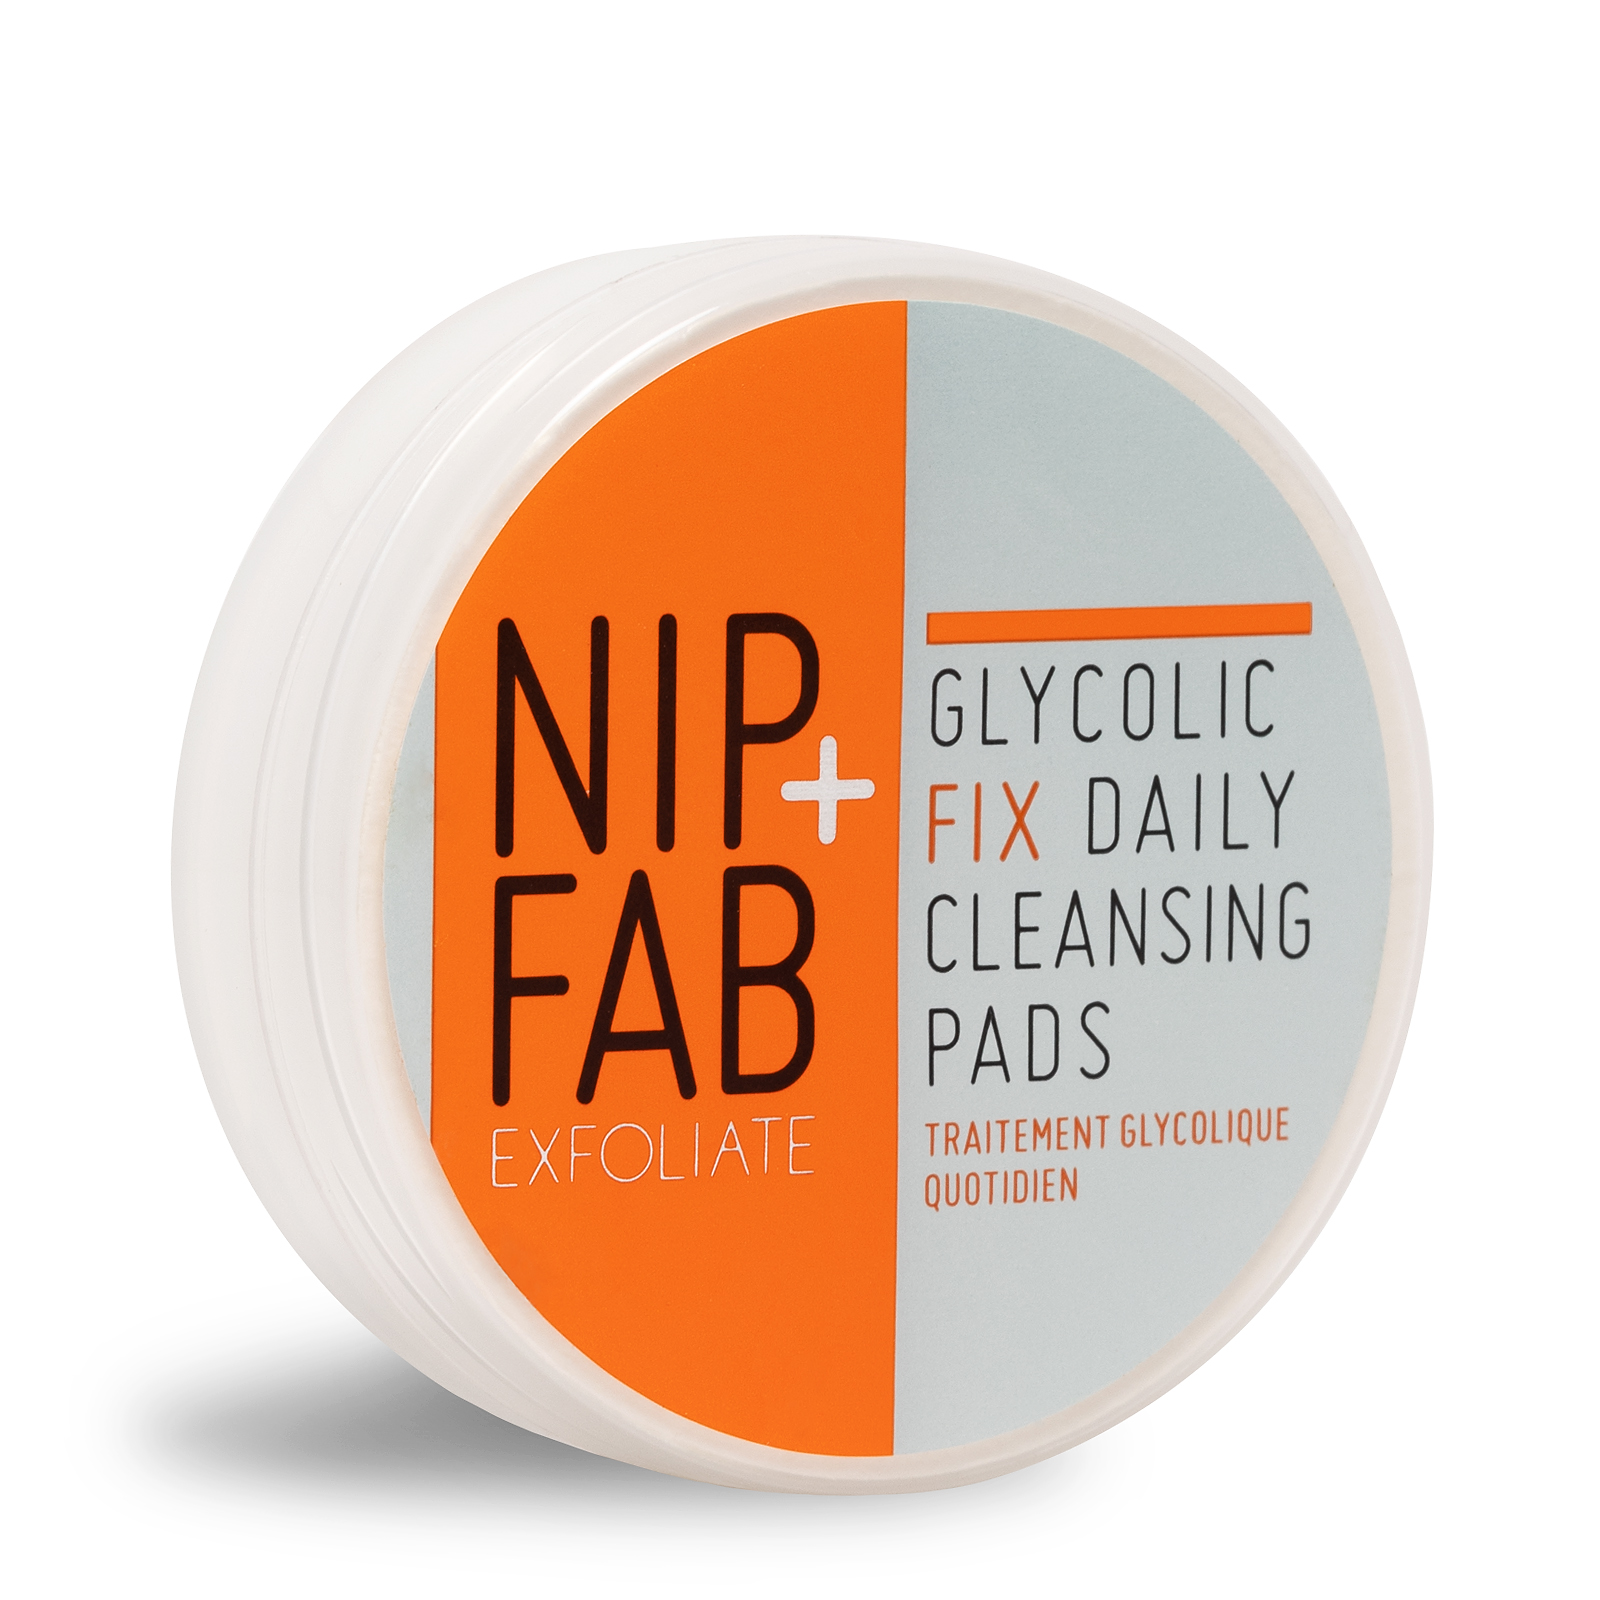 NIP+FAB Glycolic Fix Daily Cleansing 5 Pads - HK